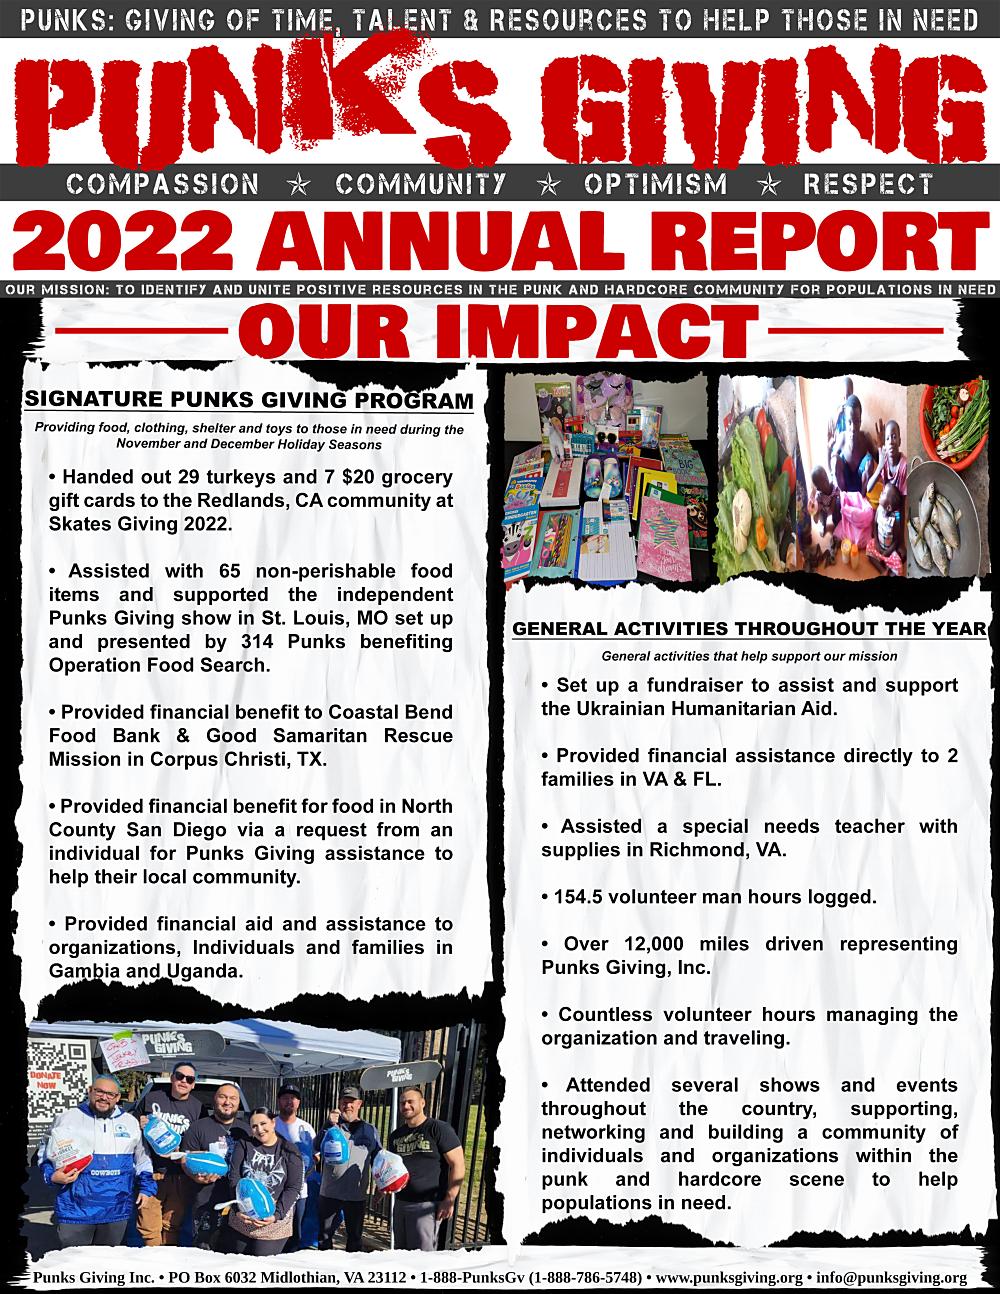 2022 Annual Report - Punks Giving - Our Impact